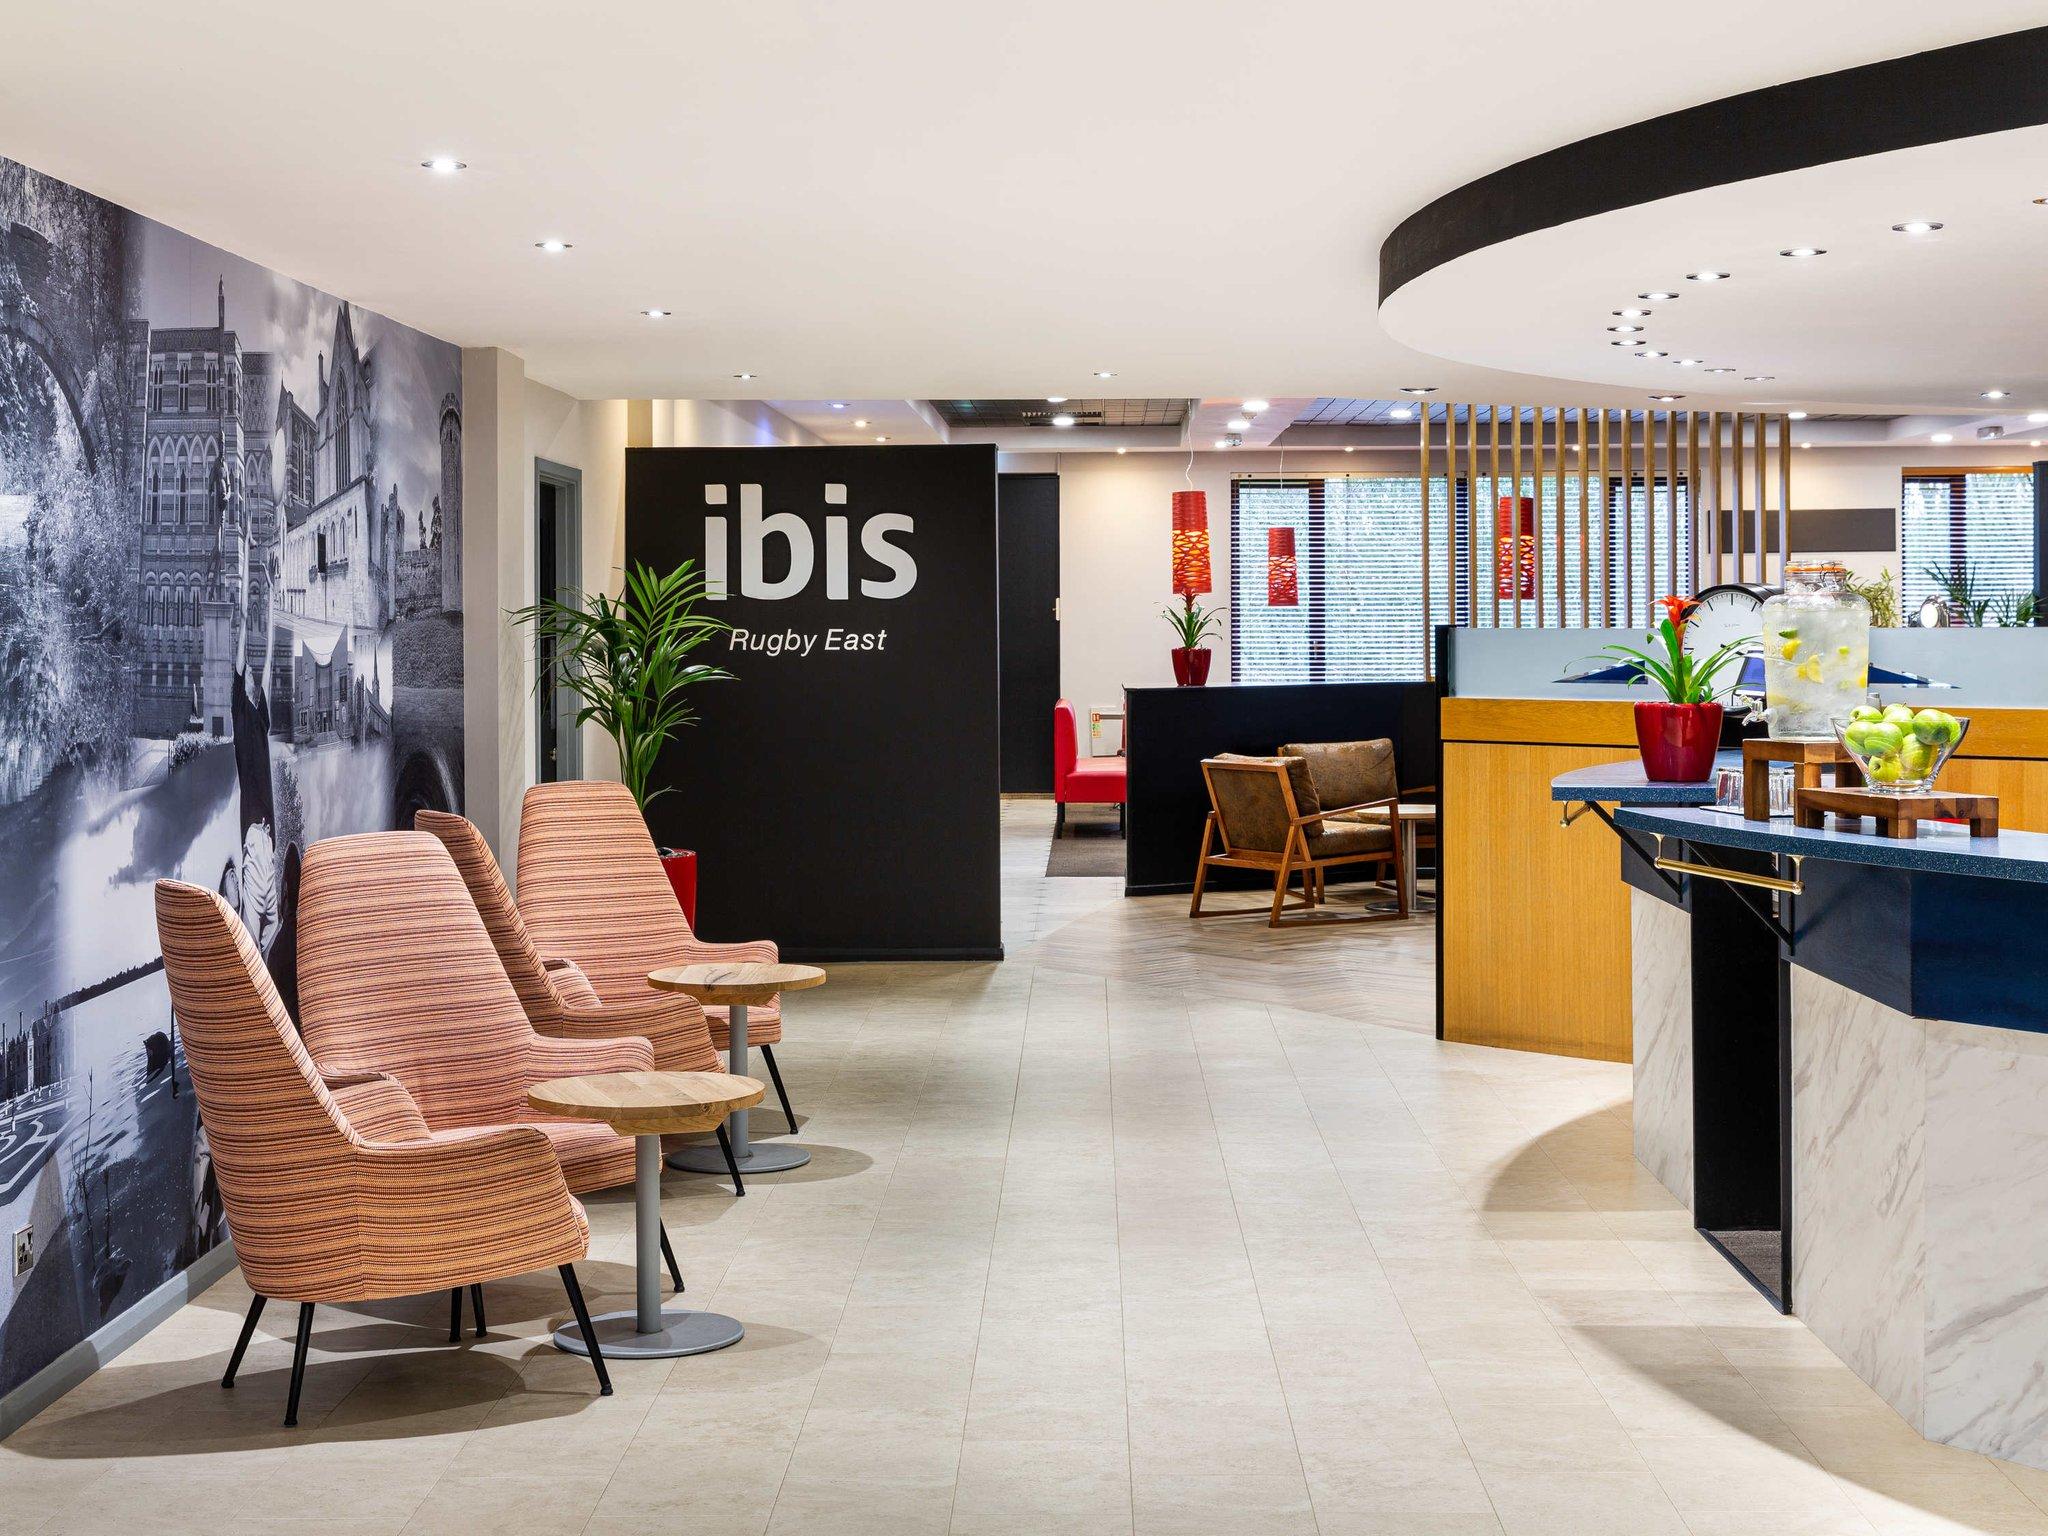 Hotel Ibis Rugby East in Northampton, GB1